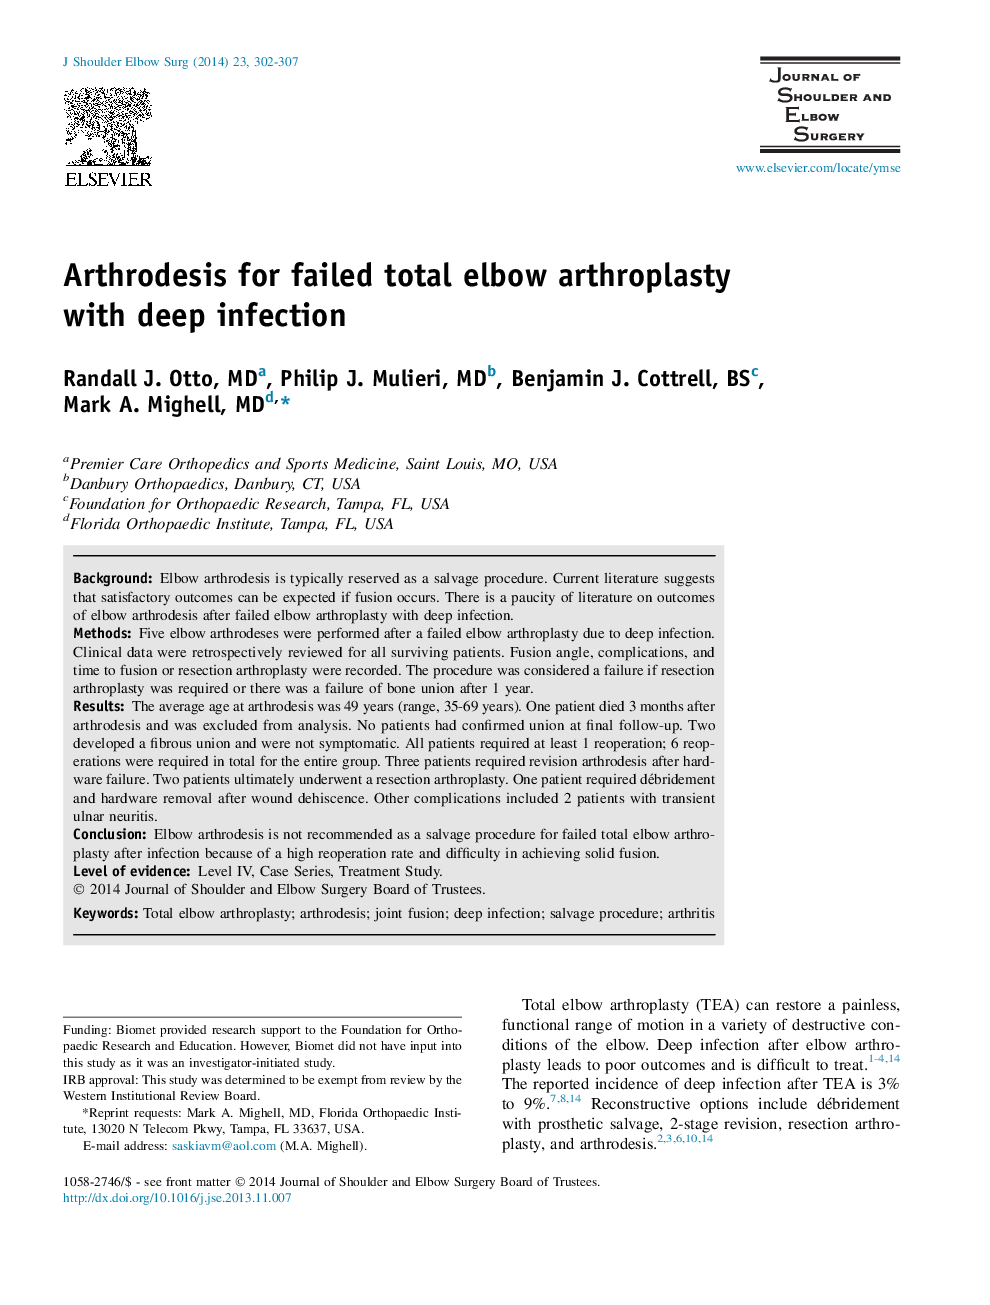 Arthrodesis for failed total elbow arthroplasty with deep infection 